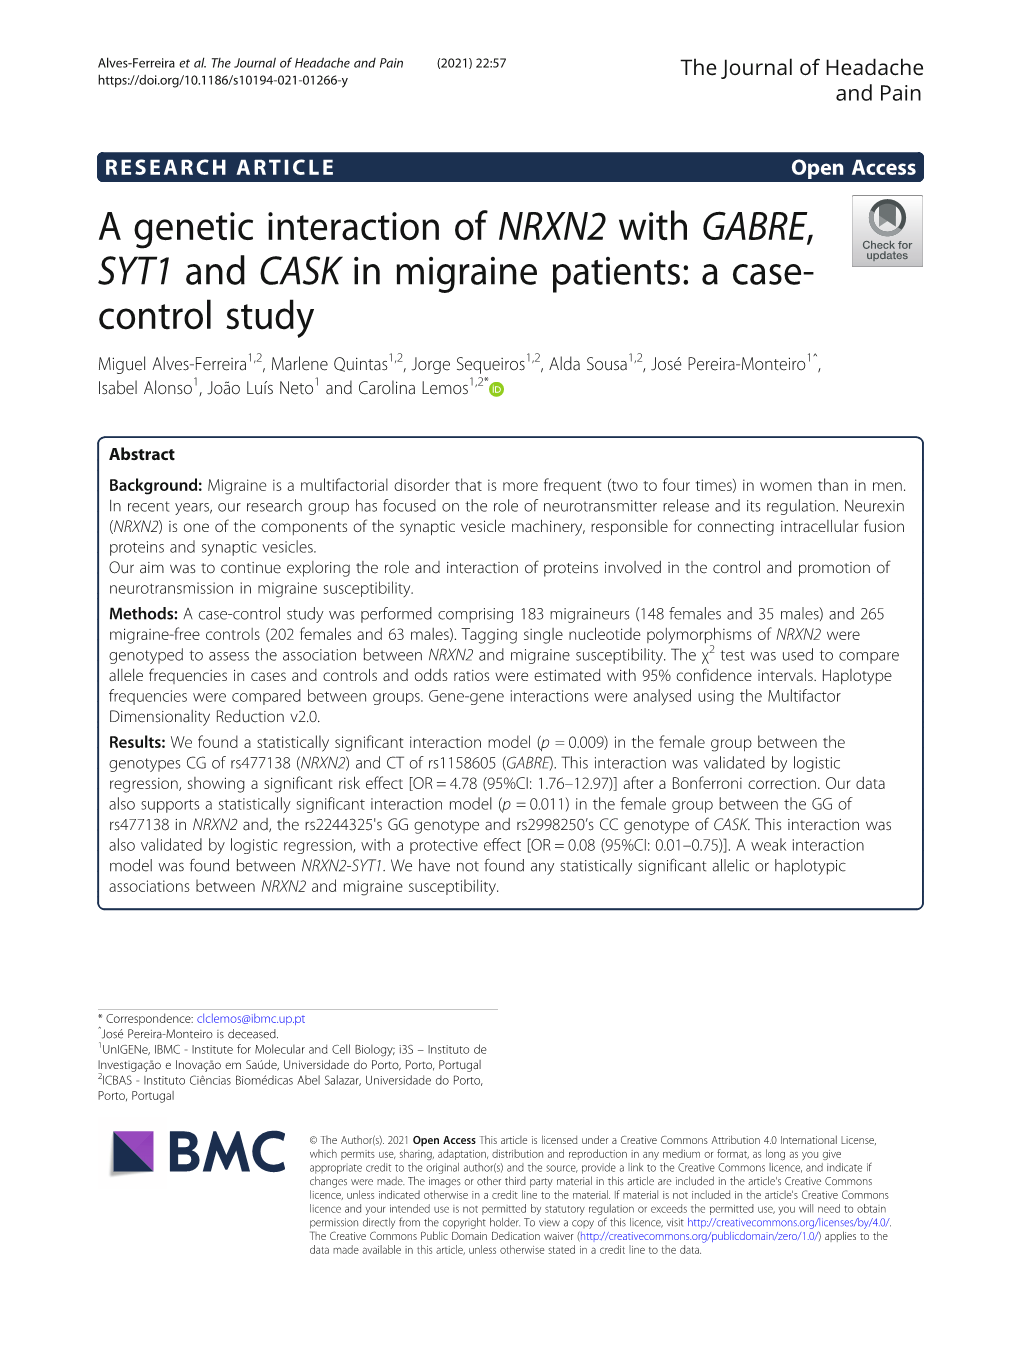 A Genetic Interaction of NRXN2 with GABRE, SYT1 and CASK In